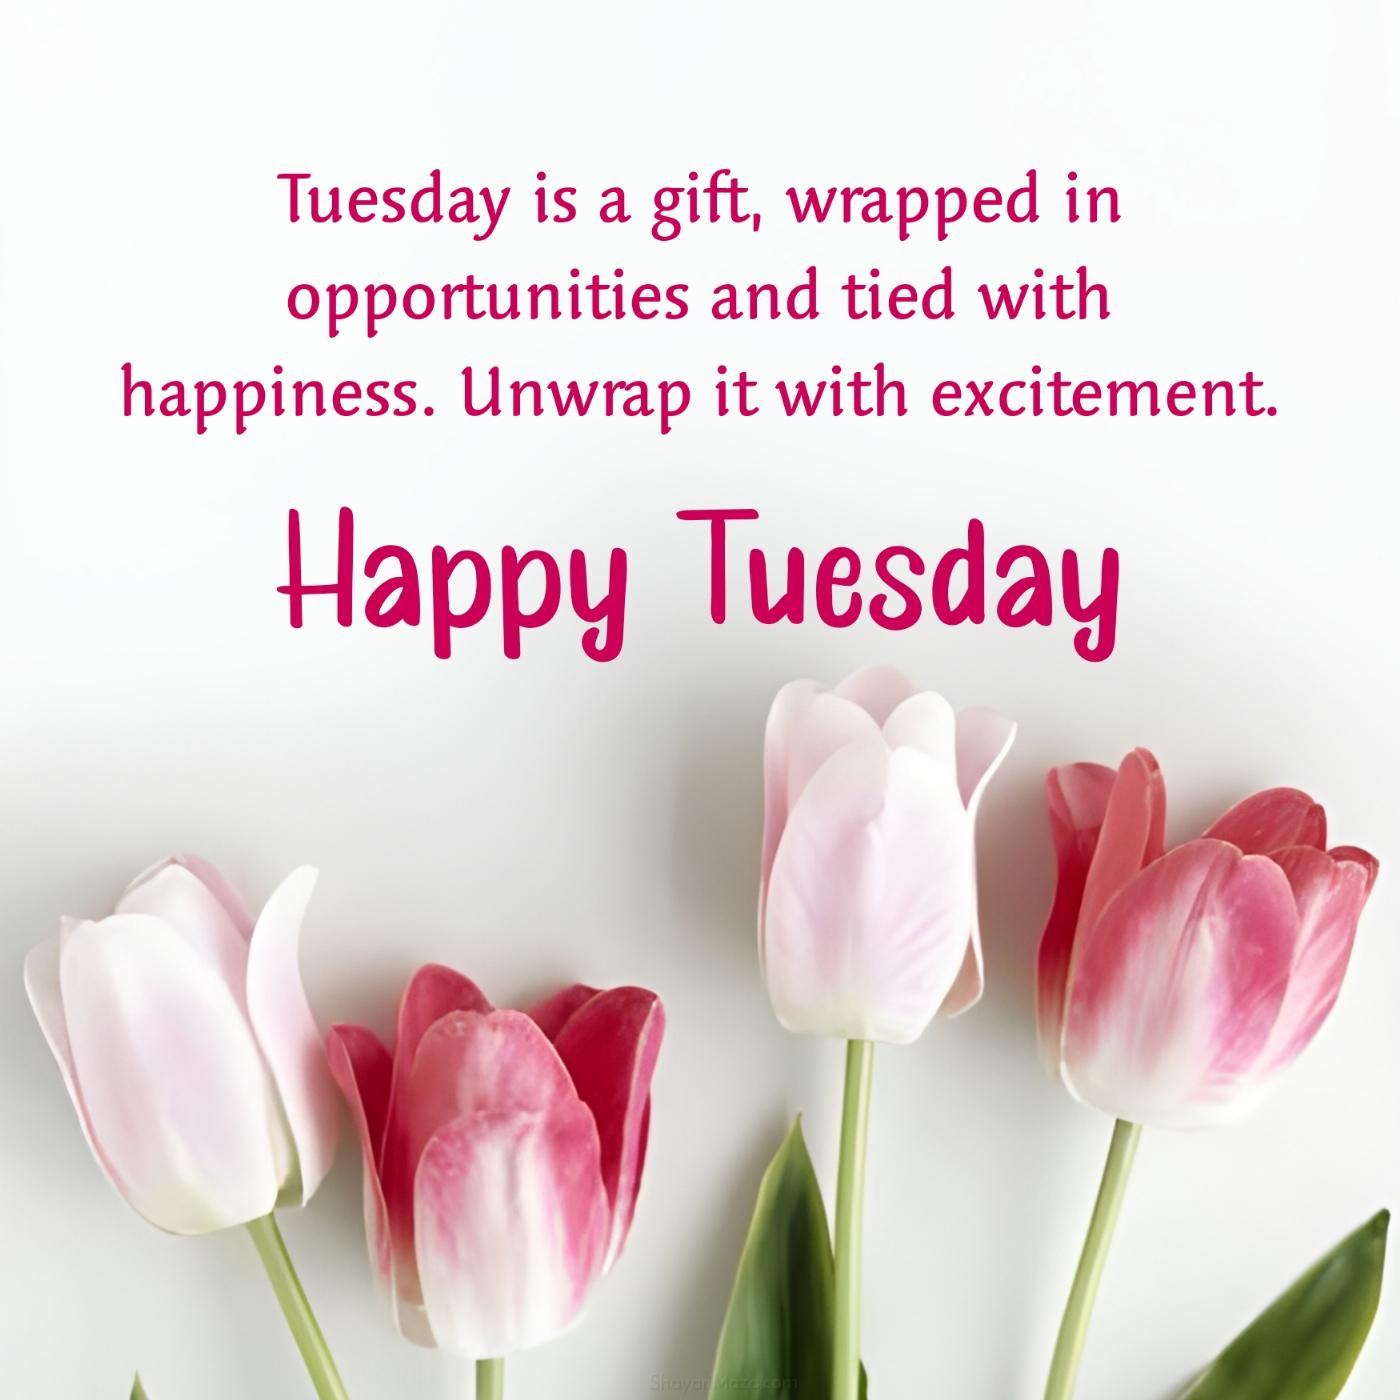 Tuesday is a gift wrapped in opportunities